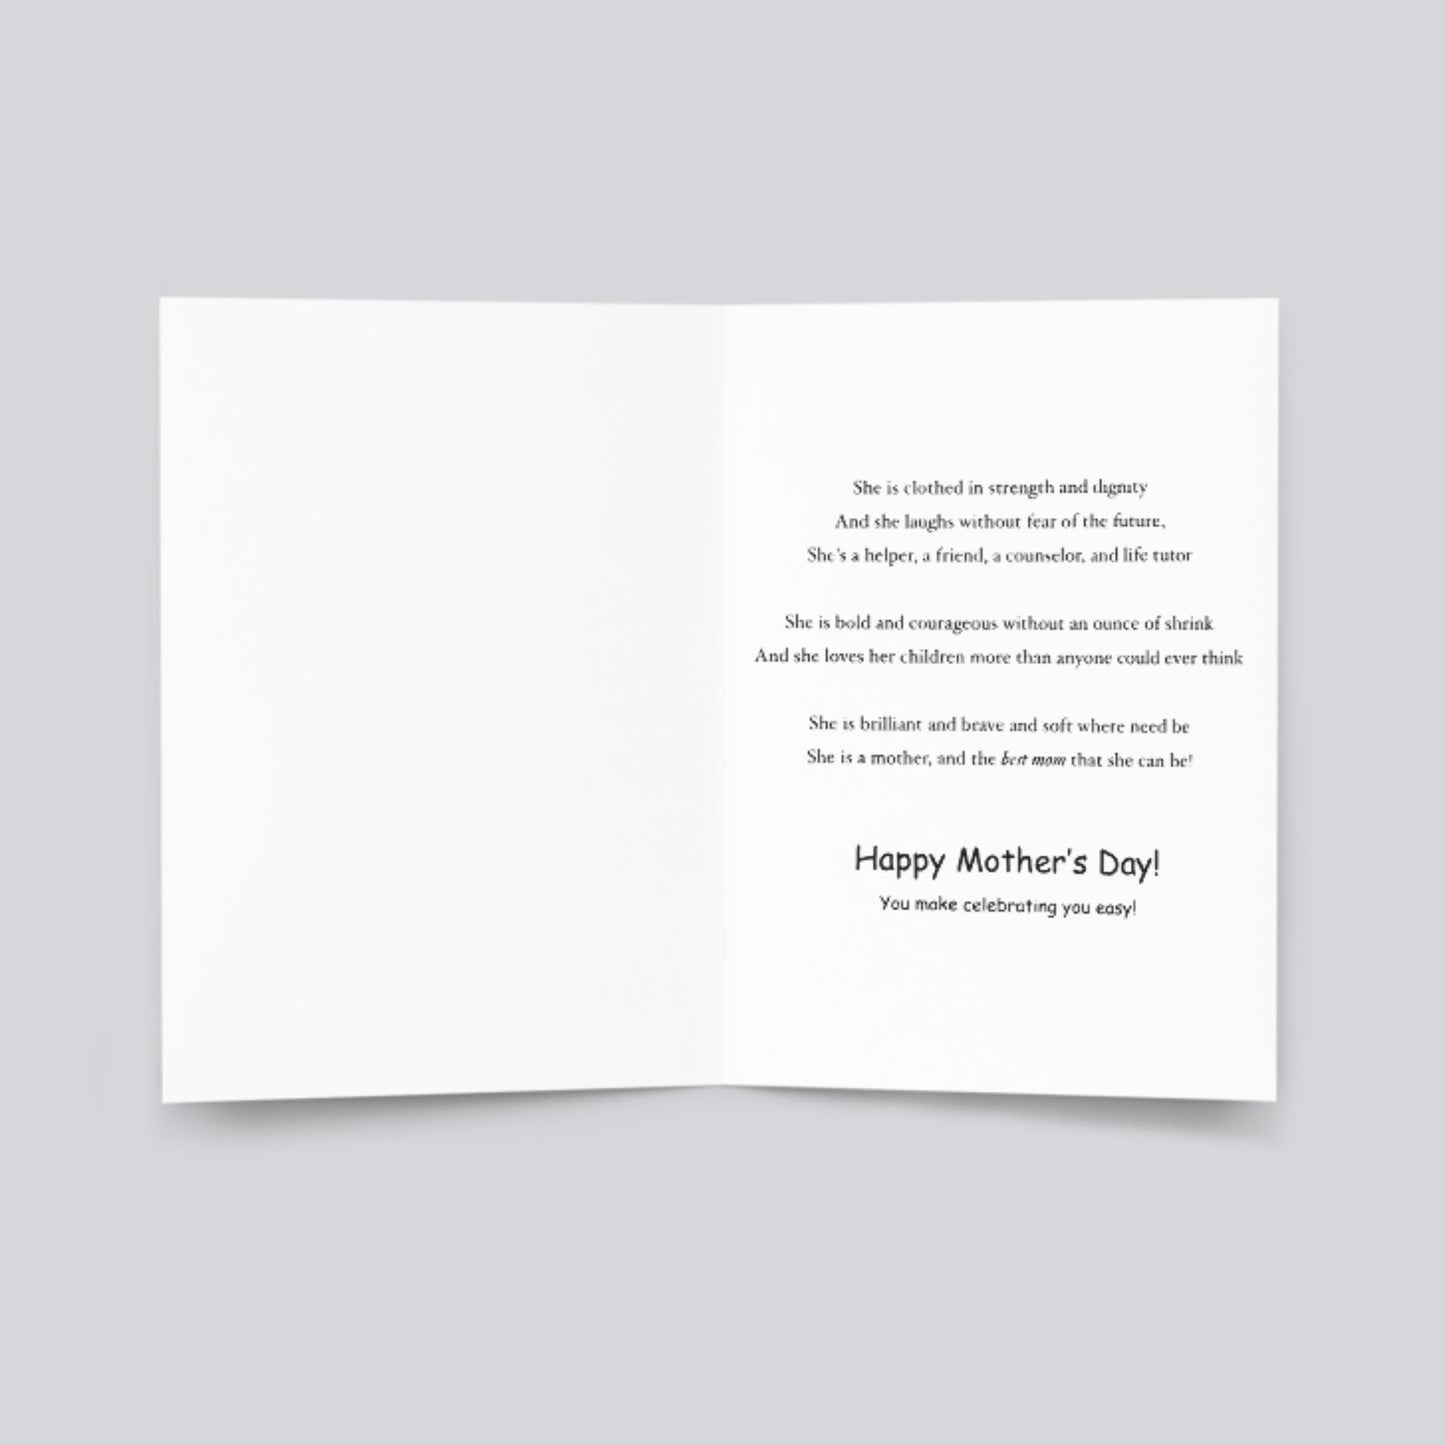 "You're My Shero" Mother's Day Greeting Card